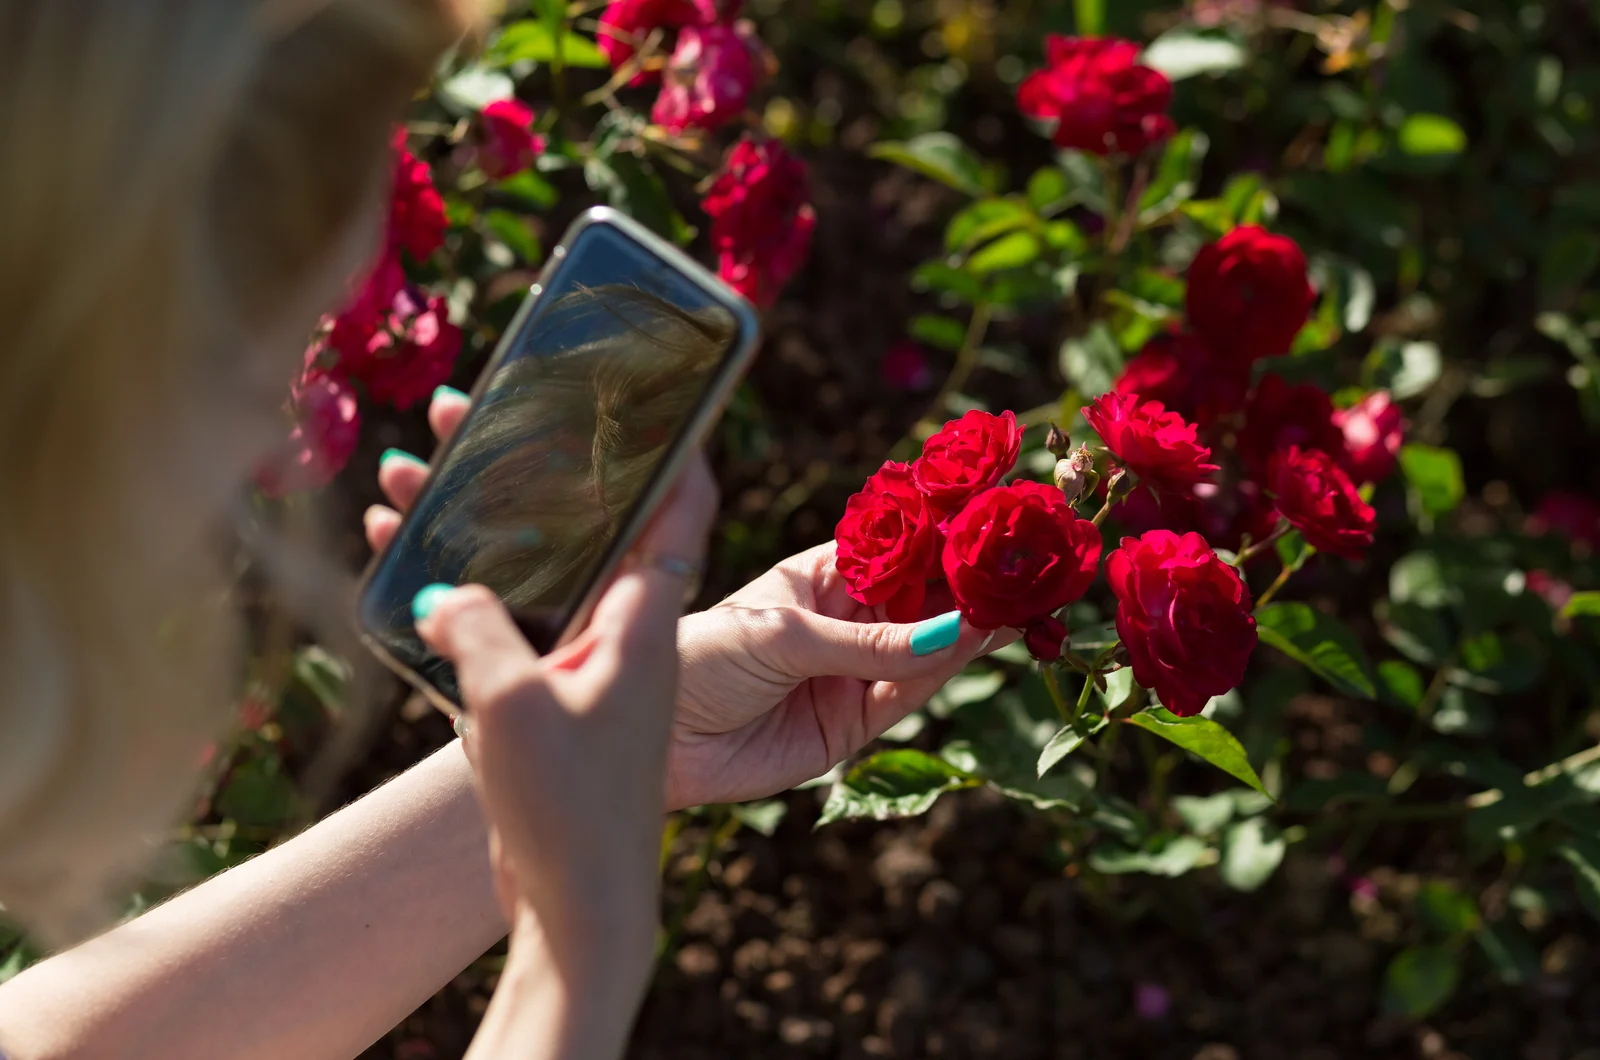 a woman with a phone takes a picture of a red rose